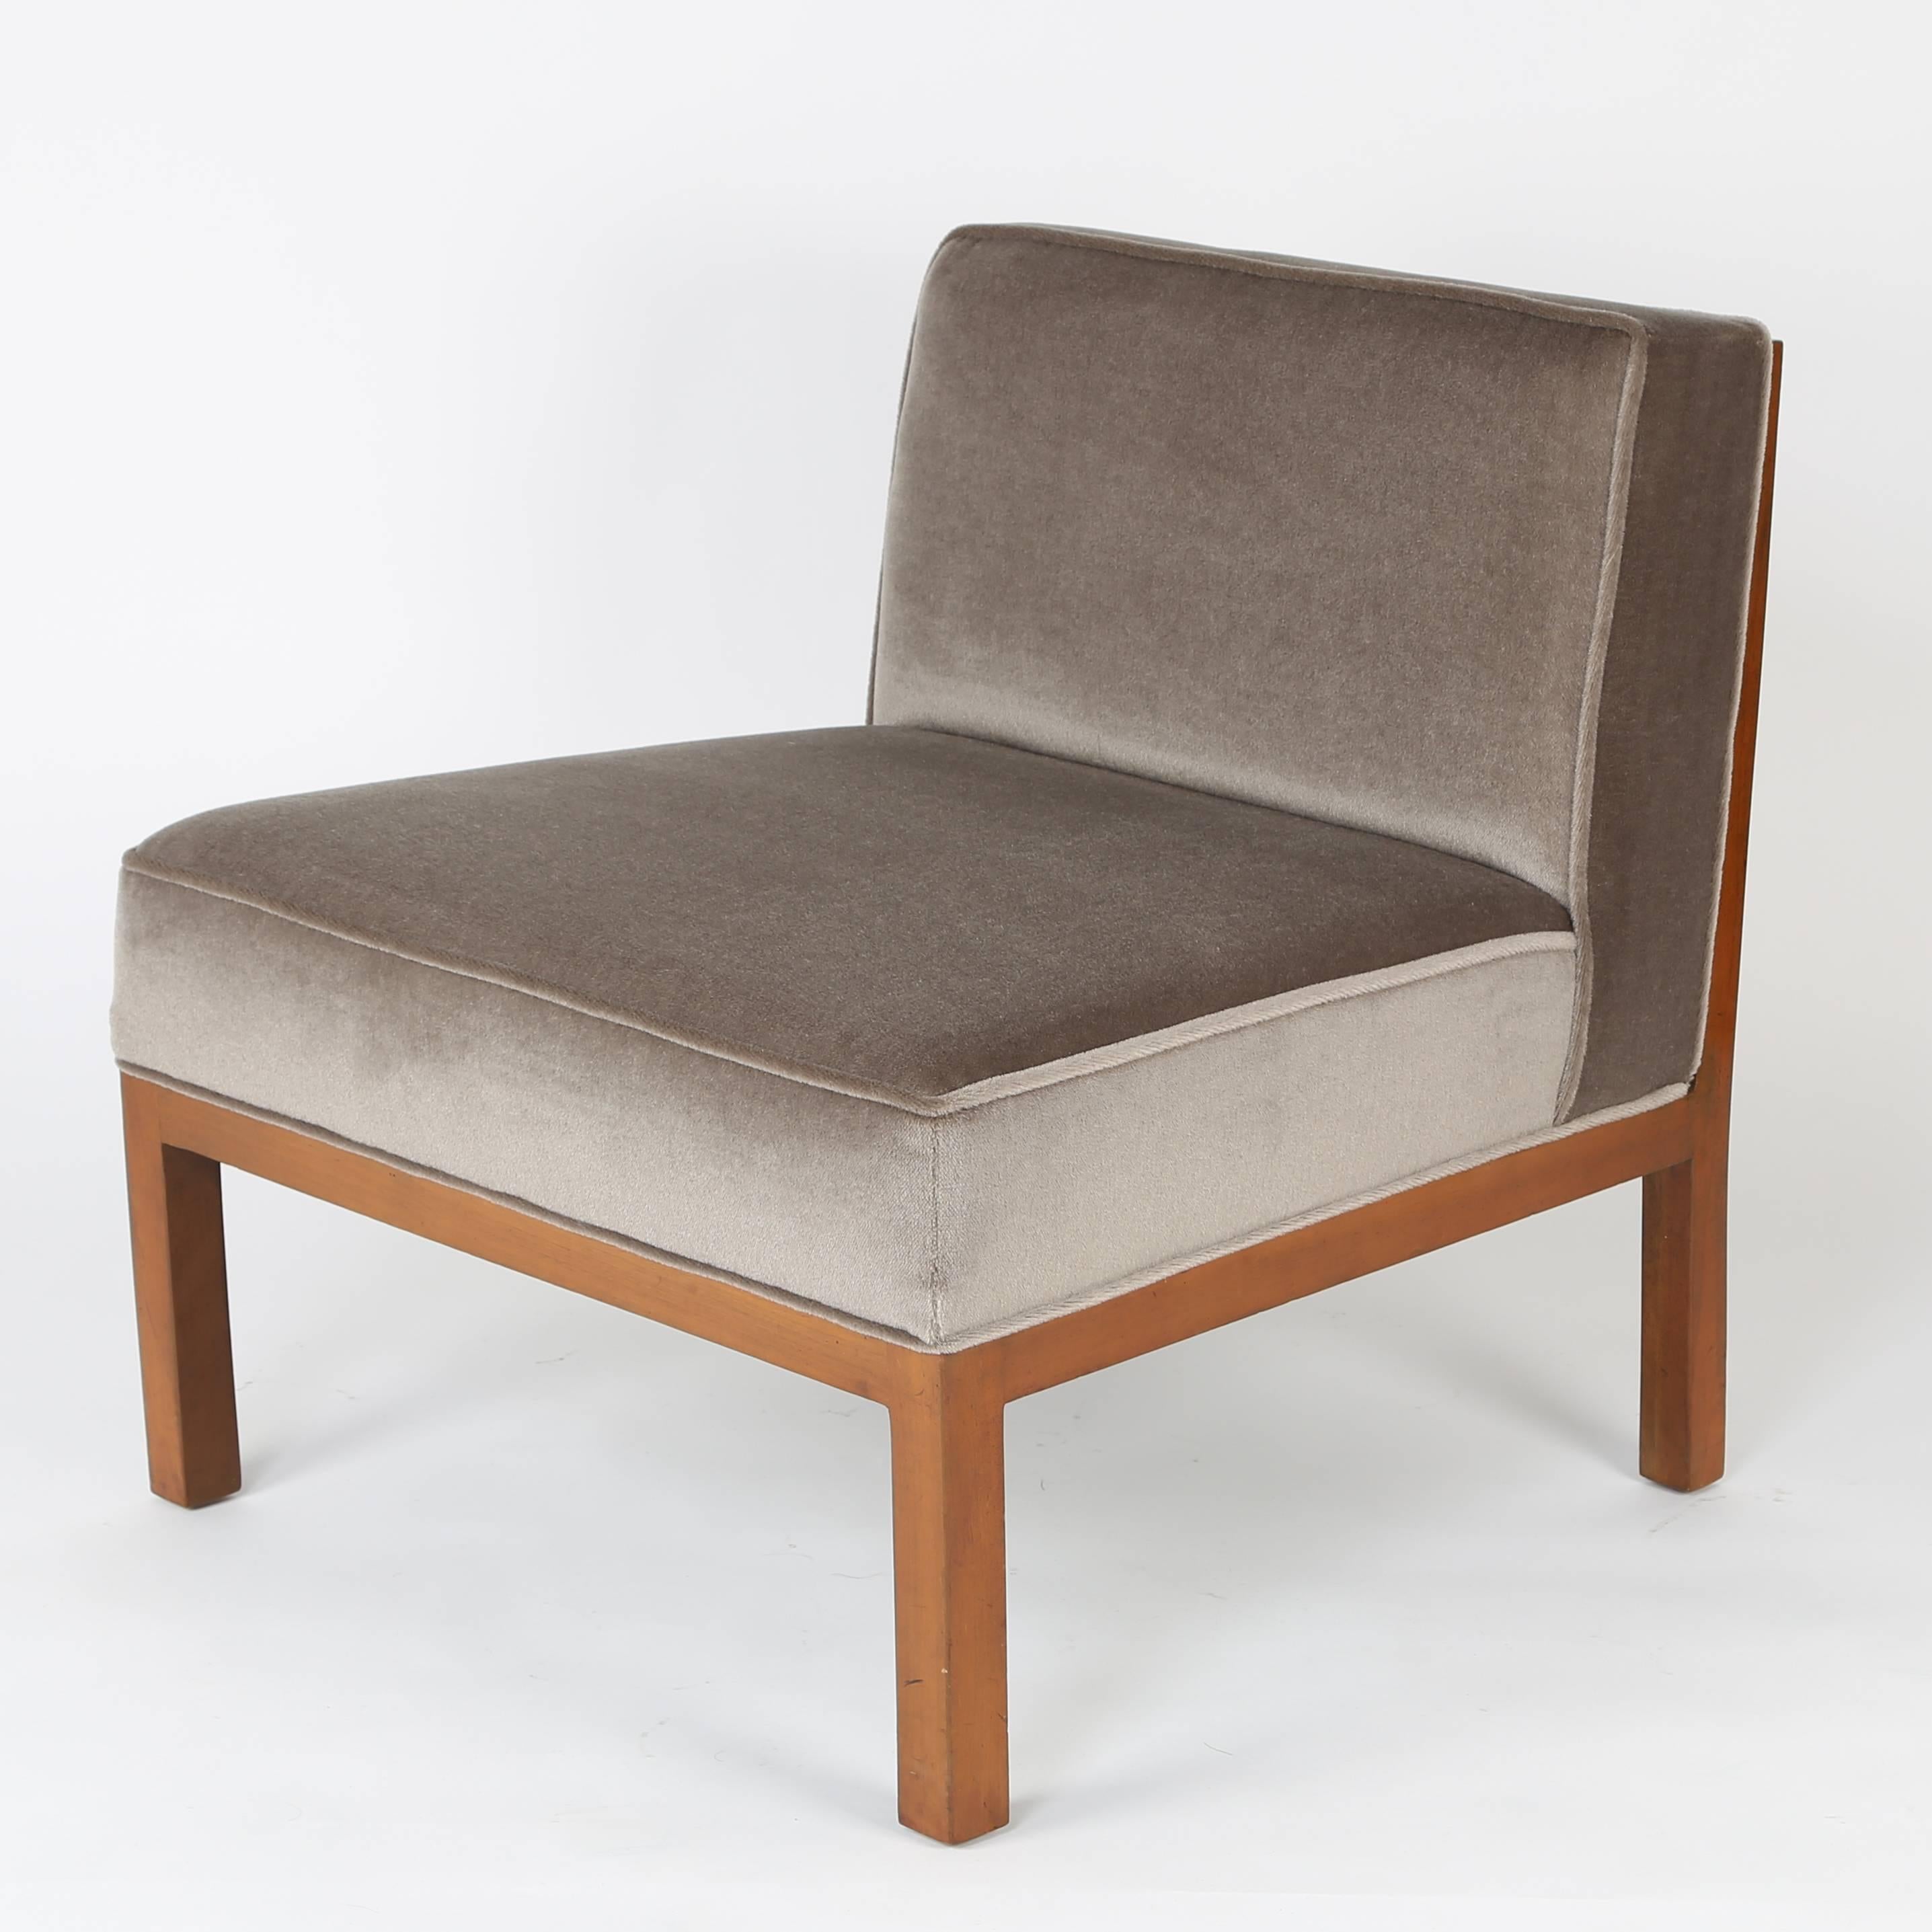 Mid-20th Century Pair of Michael Taylor for Baker Slipper Chairs, circa 1960s